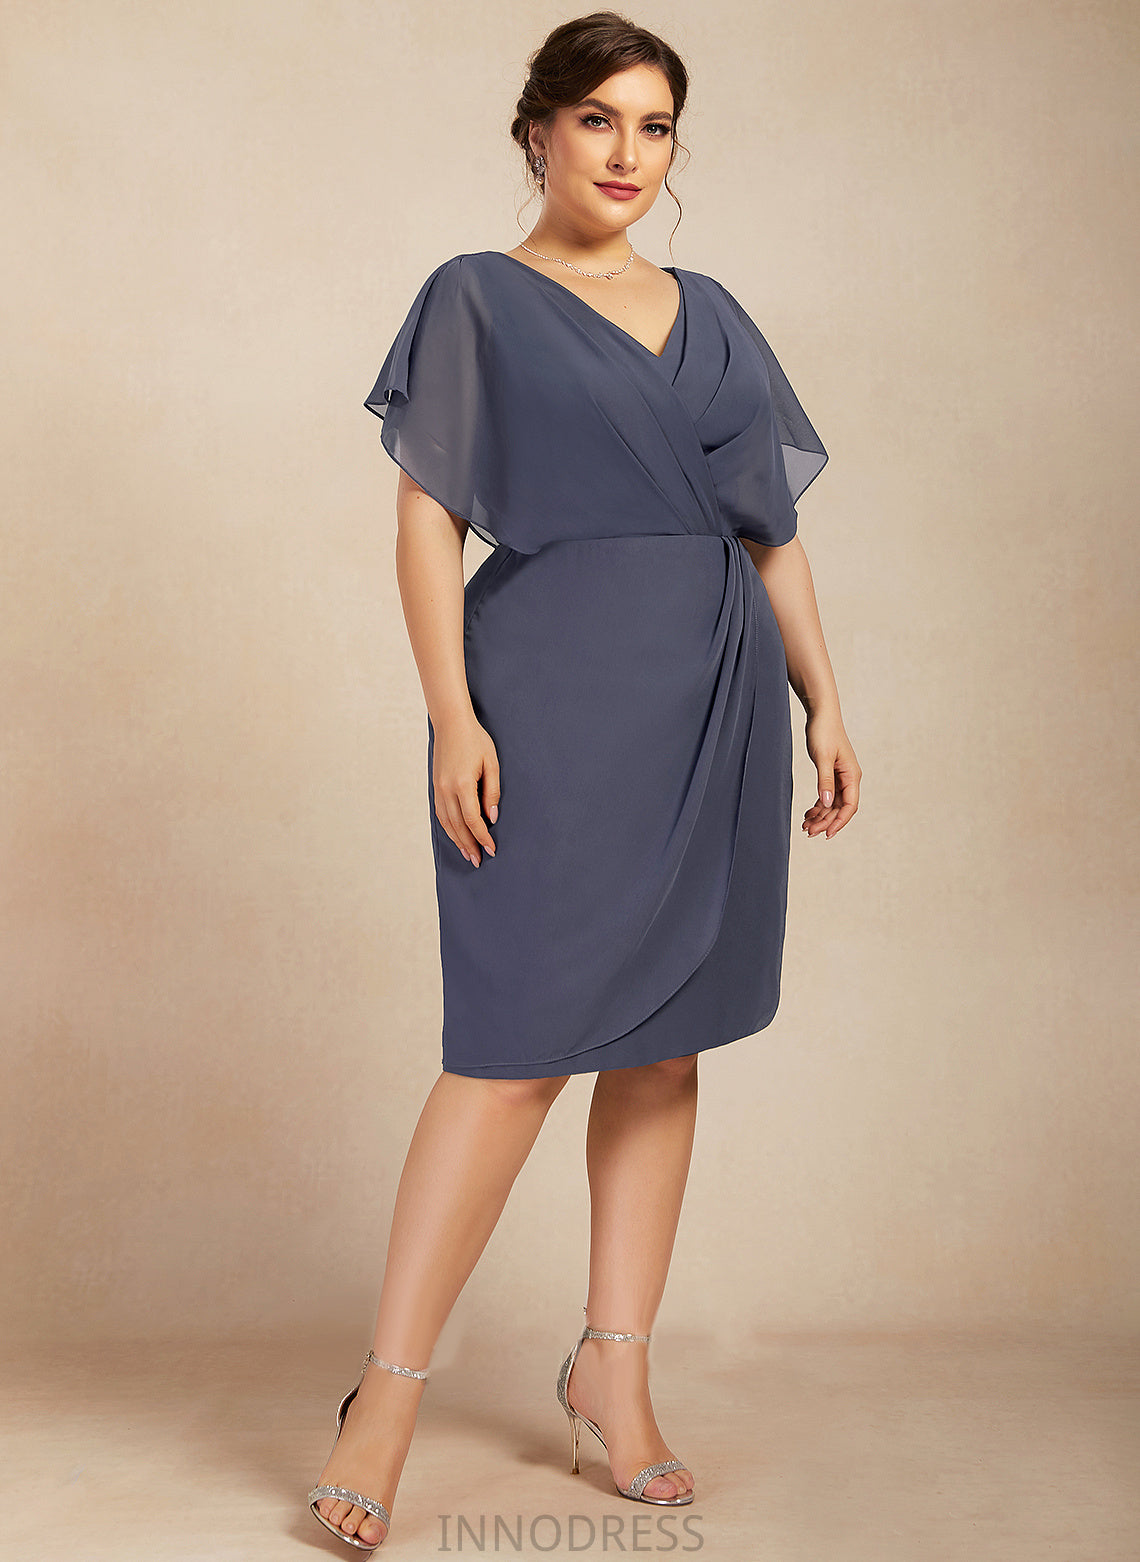 Eleanor the With Mother of the Bride Dresses Sheath/Column Dress Knee-Length of Ruffle Chiffon Bride Mother V-neck